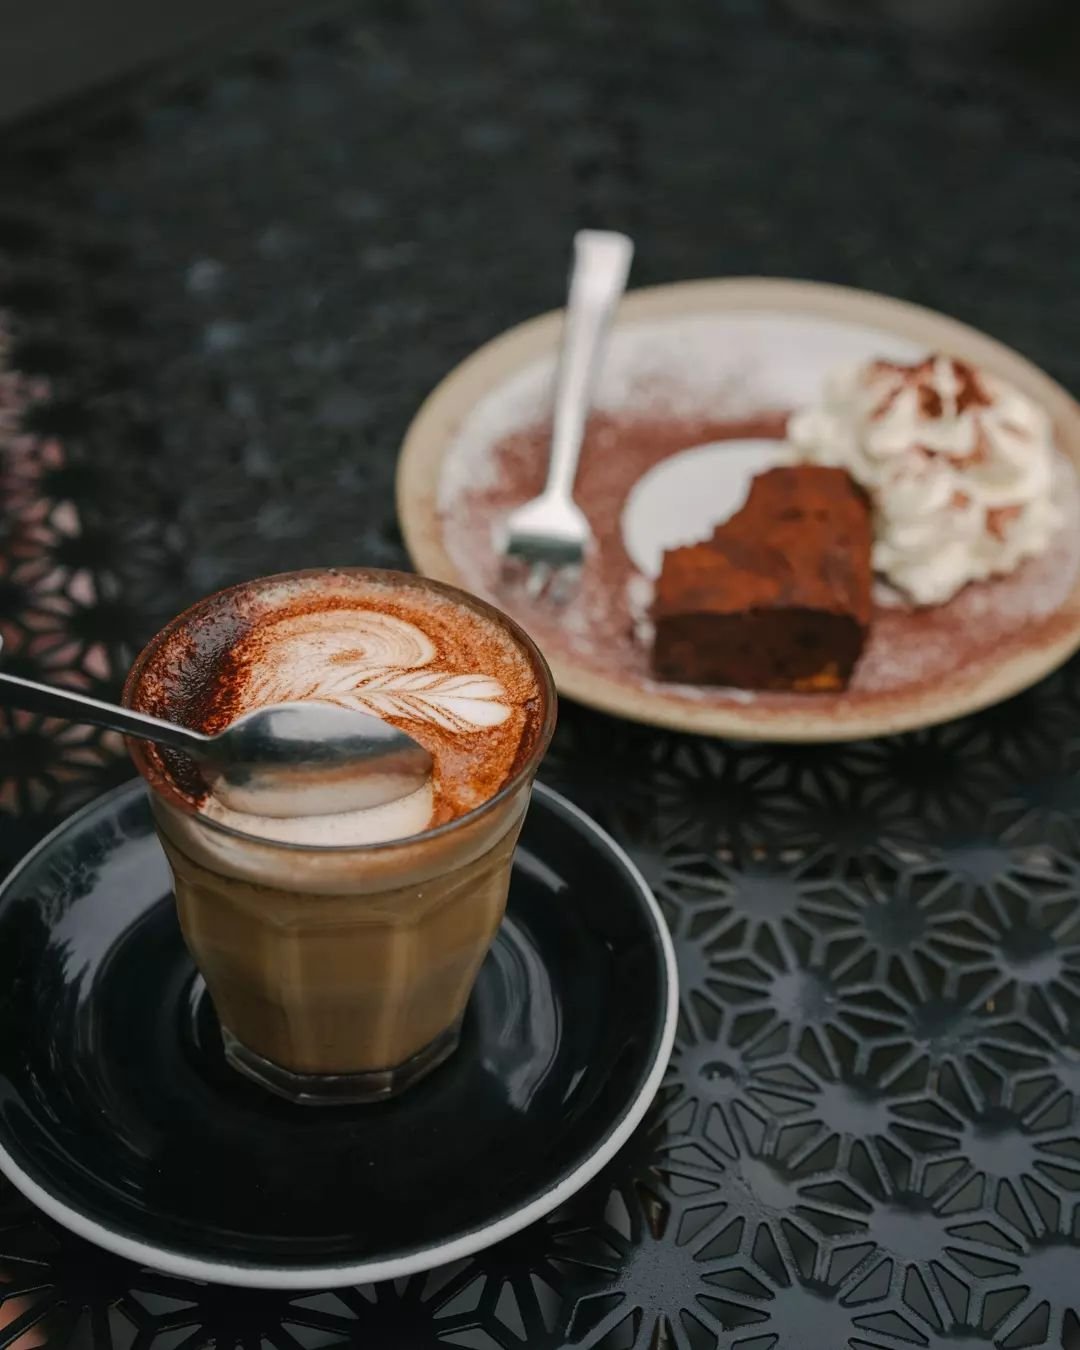 Life's too short for just one treat! 🍰☕ Dive into the delight of our freshly baked brownie with a swirl of whipped cream, perfectly accompanied by a classic latte. 

#SweetSavour #CafeLife #ChocolateLovers #MelbourneCafes #ConceptCoffeeTreats